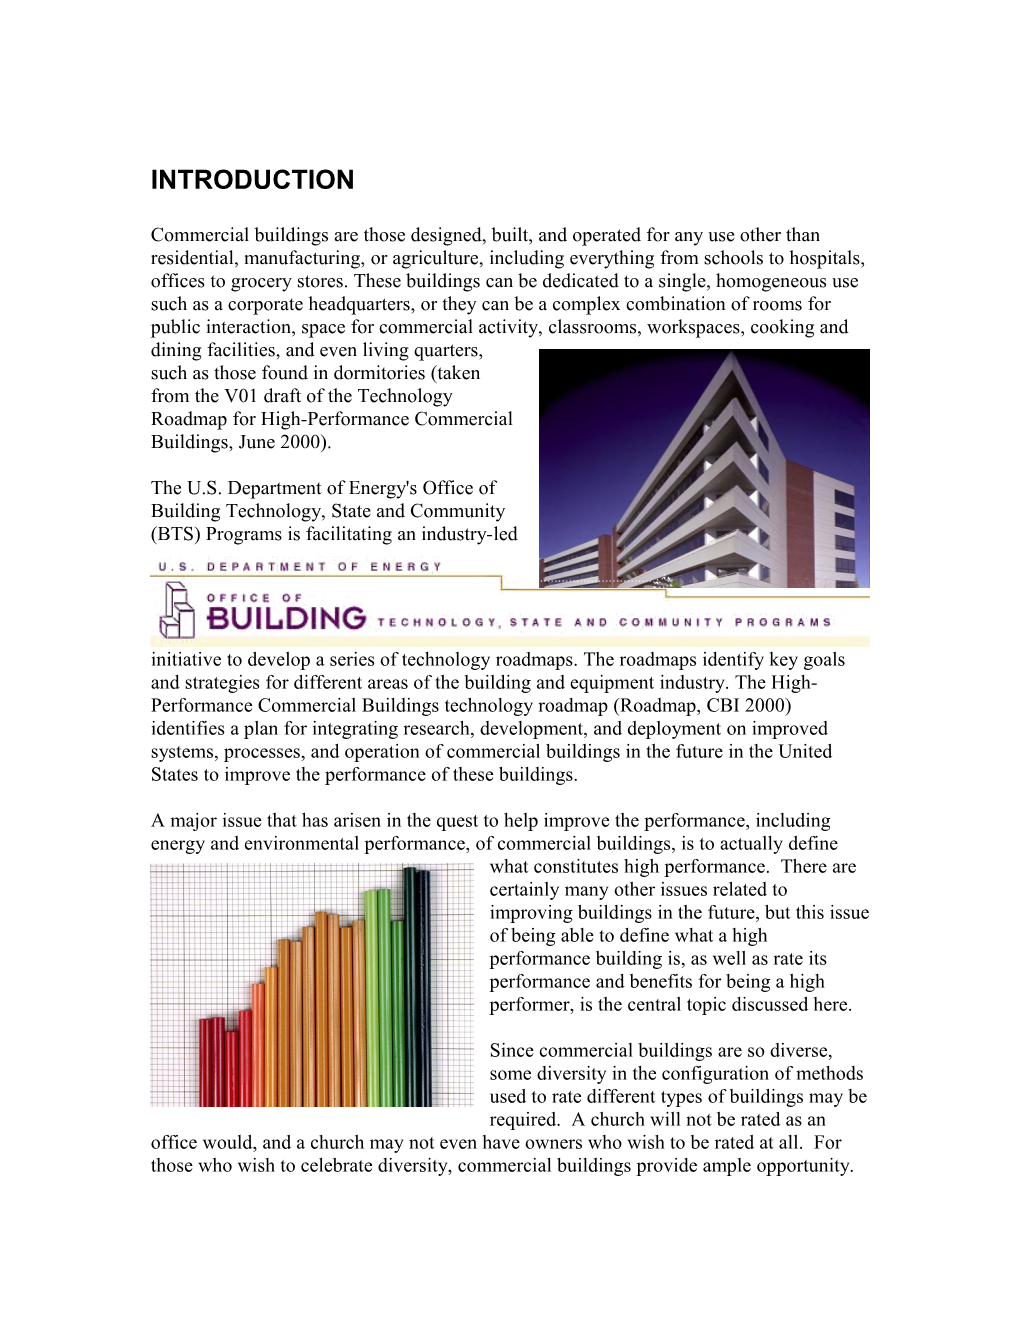 Defining and Rating Commercial Building Performance